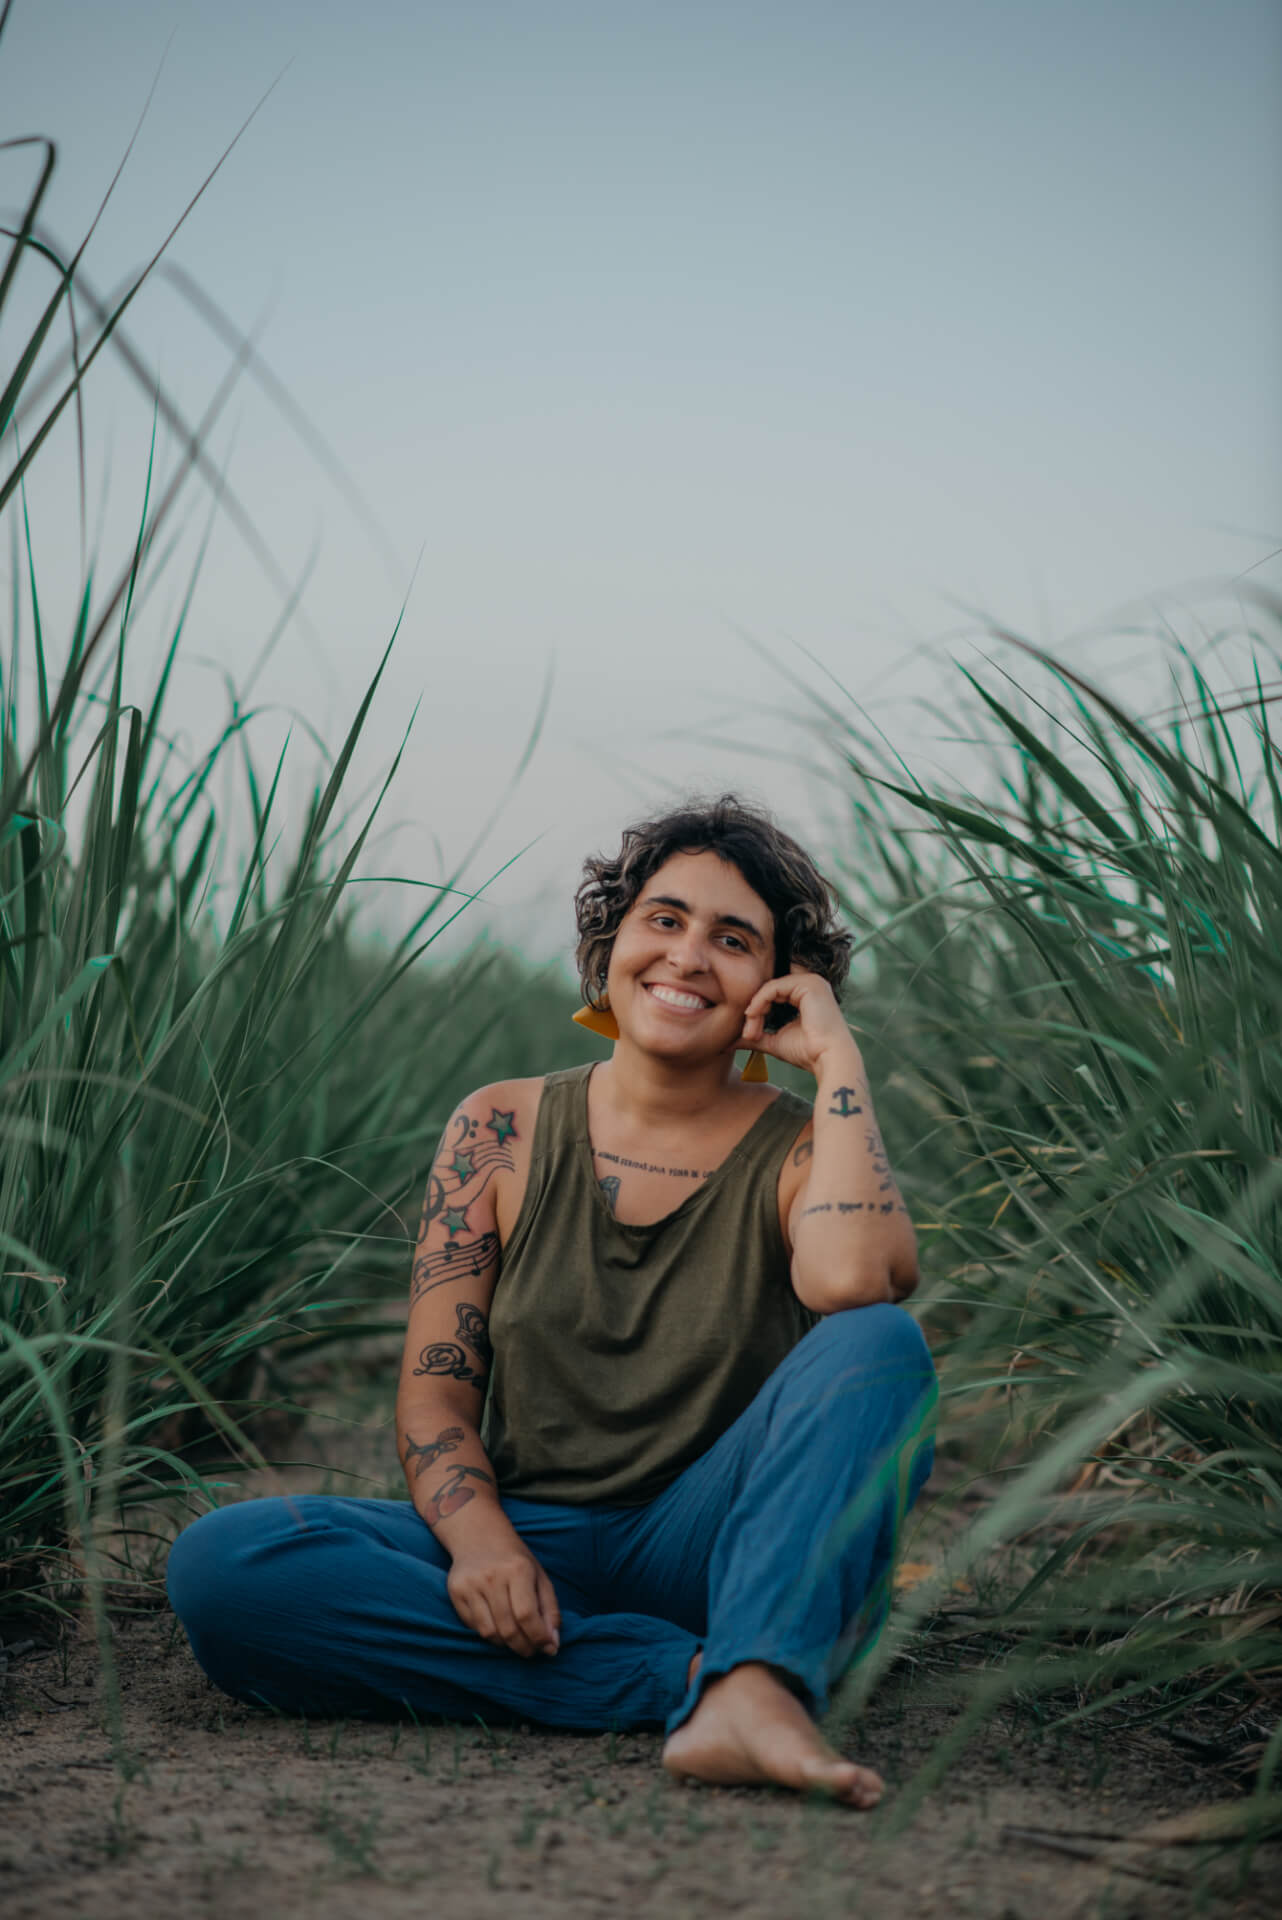 Photographer Céu Albuquerque sitting comfortably on the ground in a green tank top and jeans